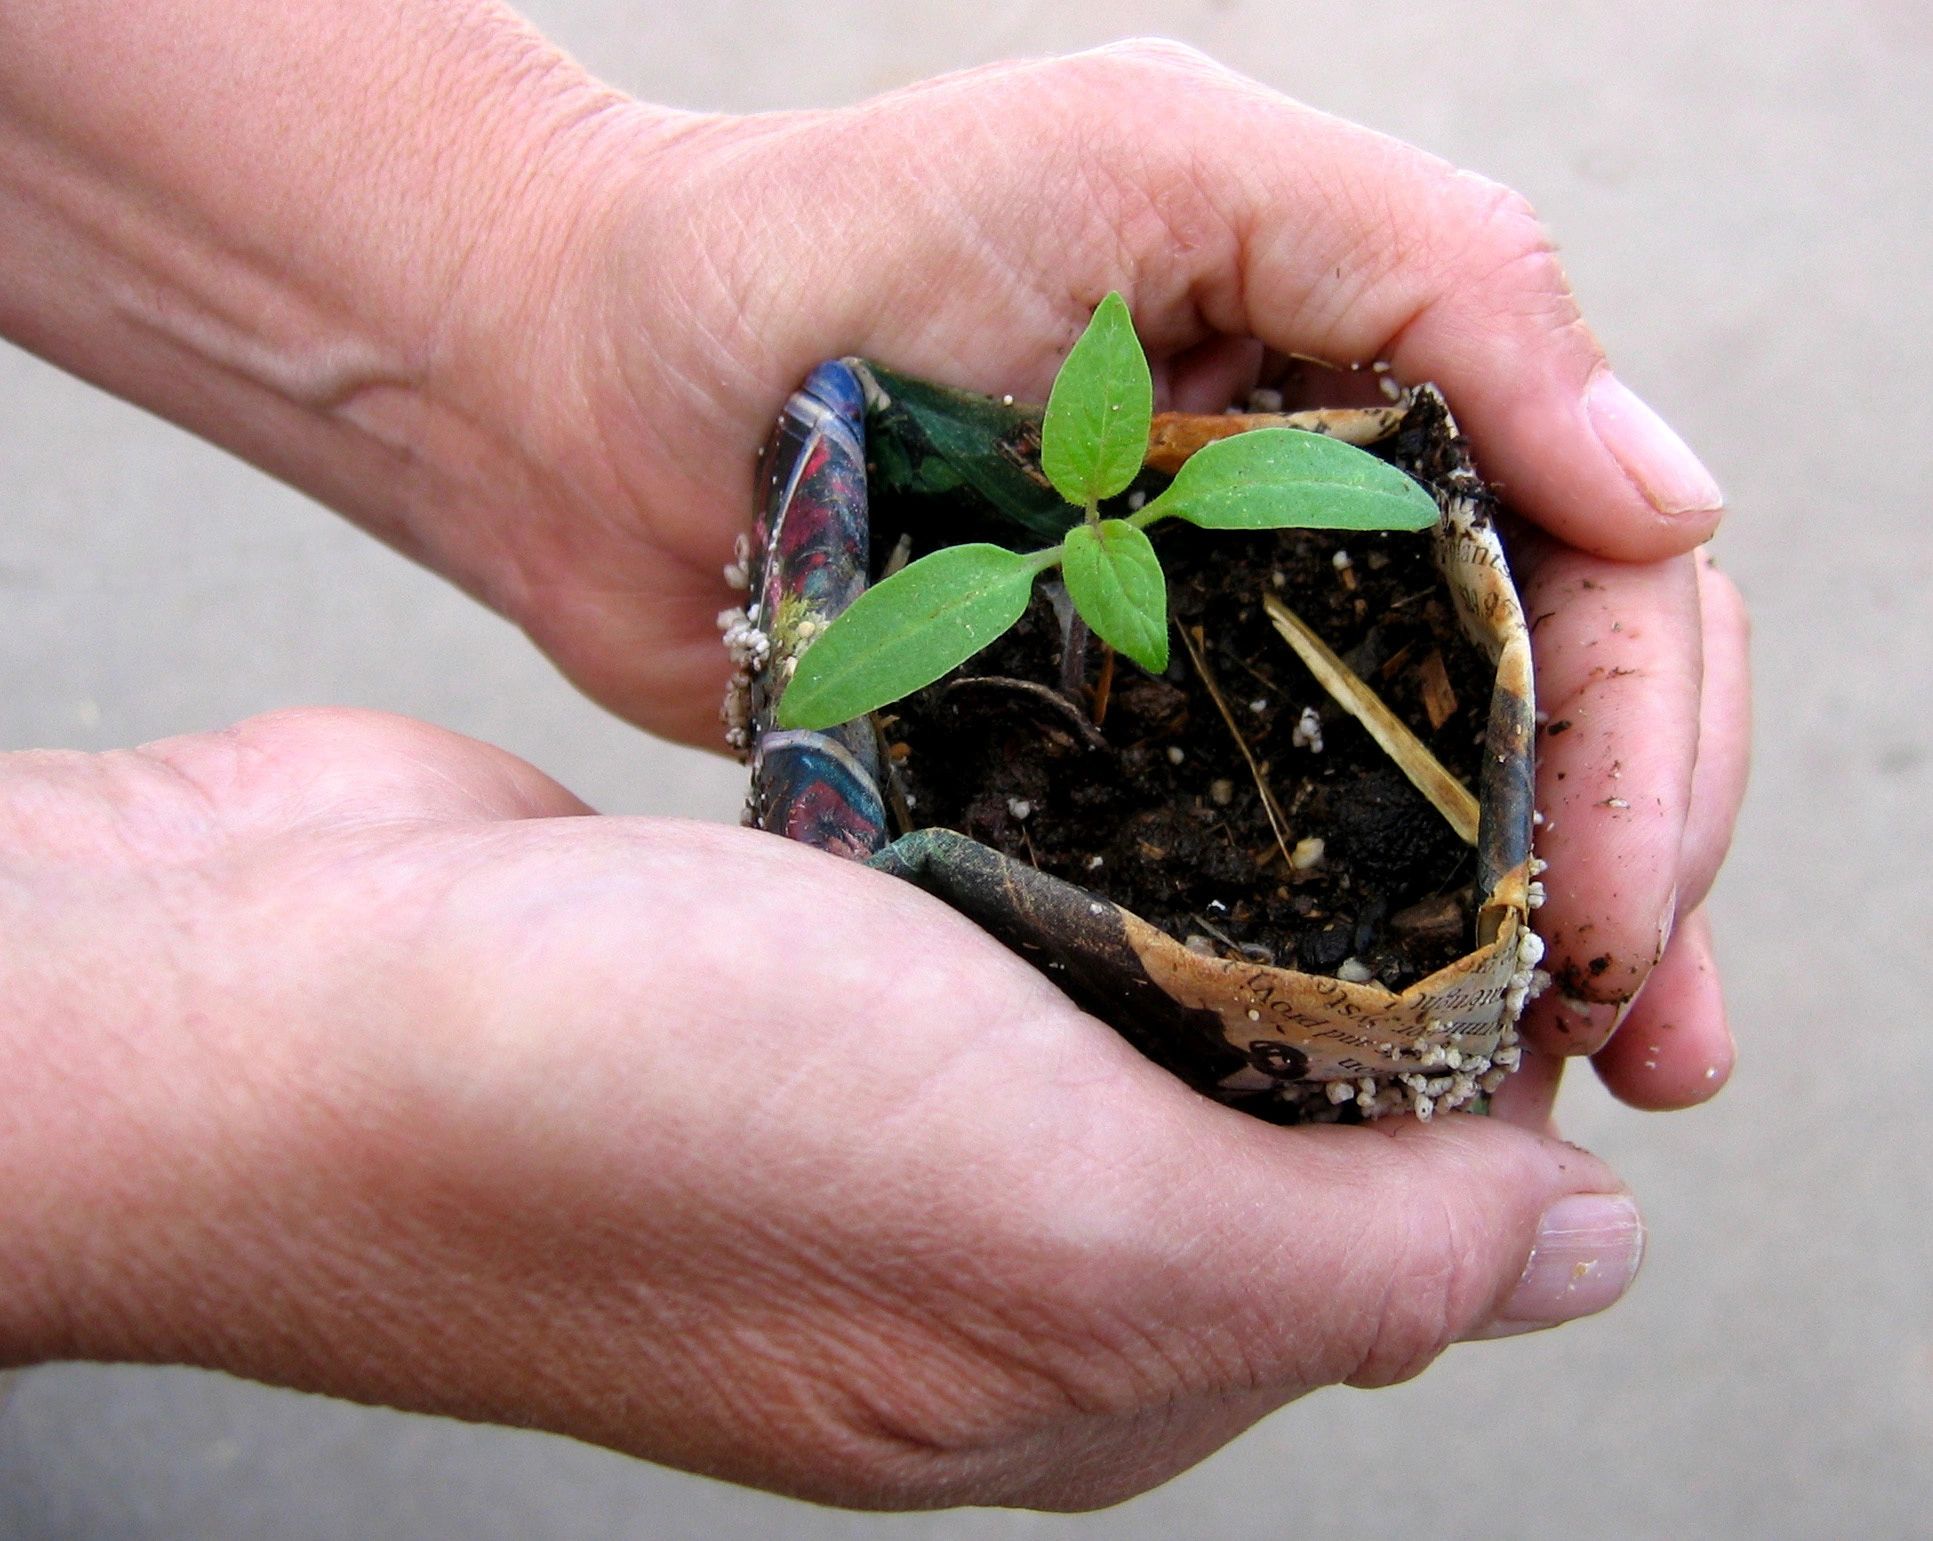 Holding a tomato seedling